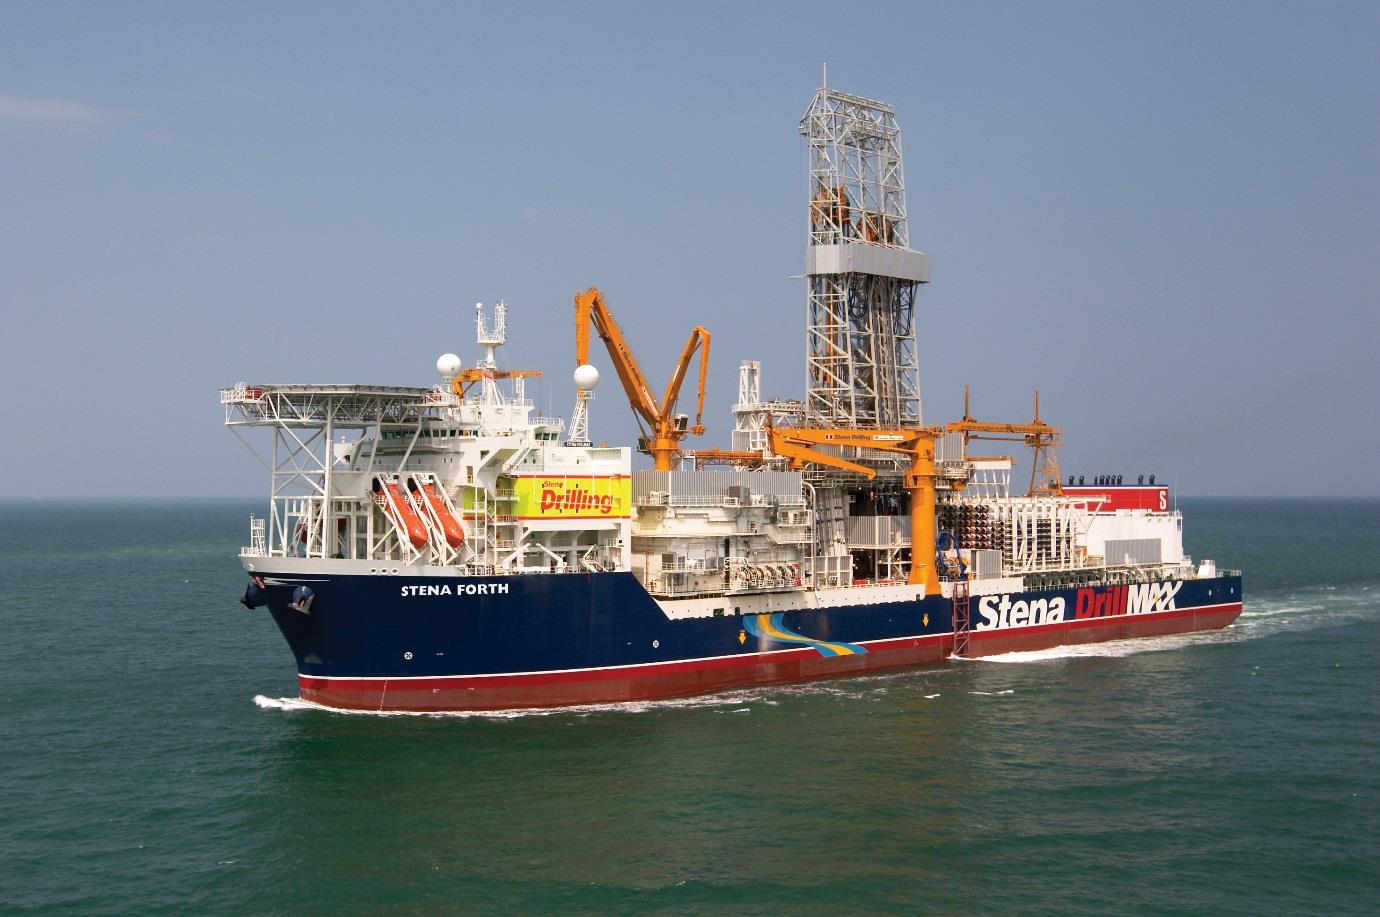 Stena Forth drillship is drilling the well for Tullow